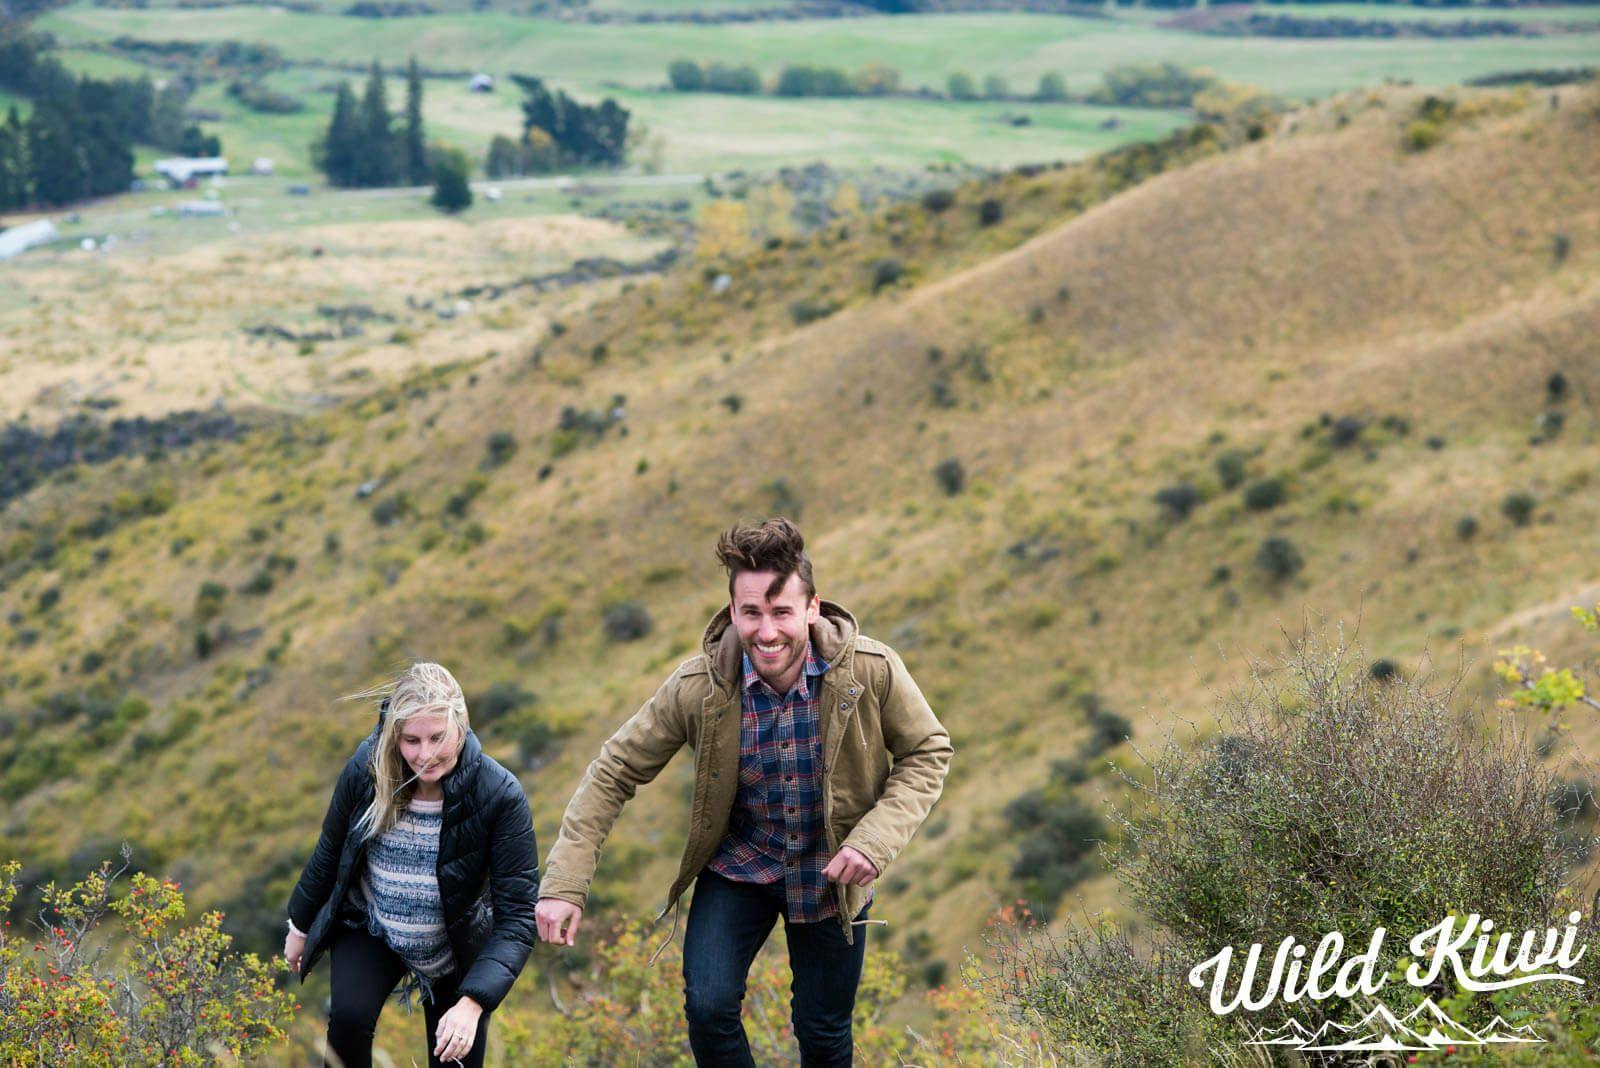 Transport yourself to the wilderness with Wild Kiwi tours - Visit mountains and hike up for awesome views